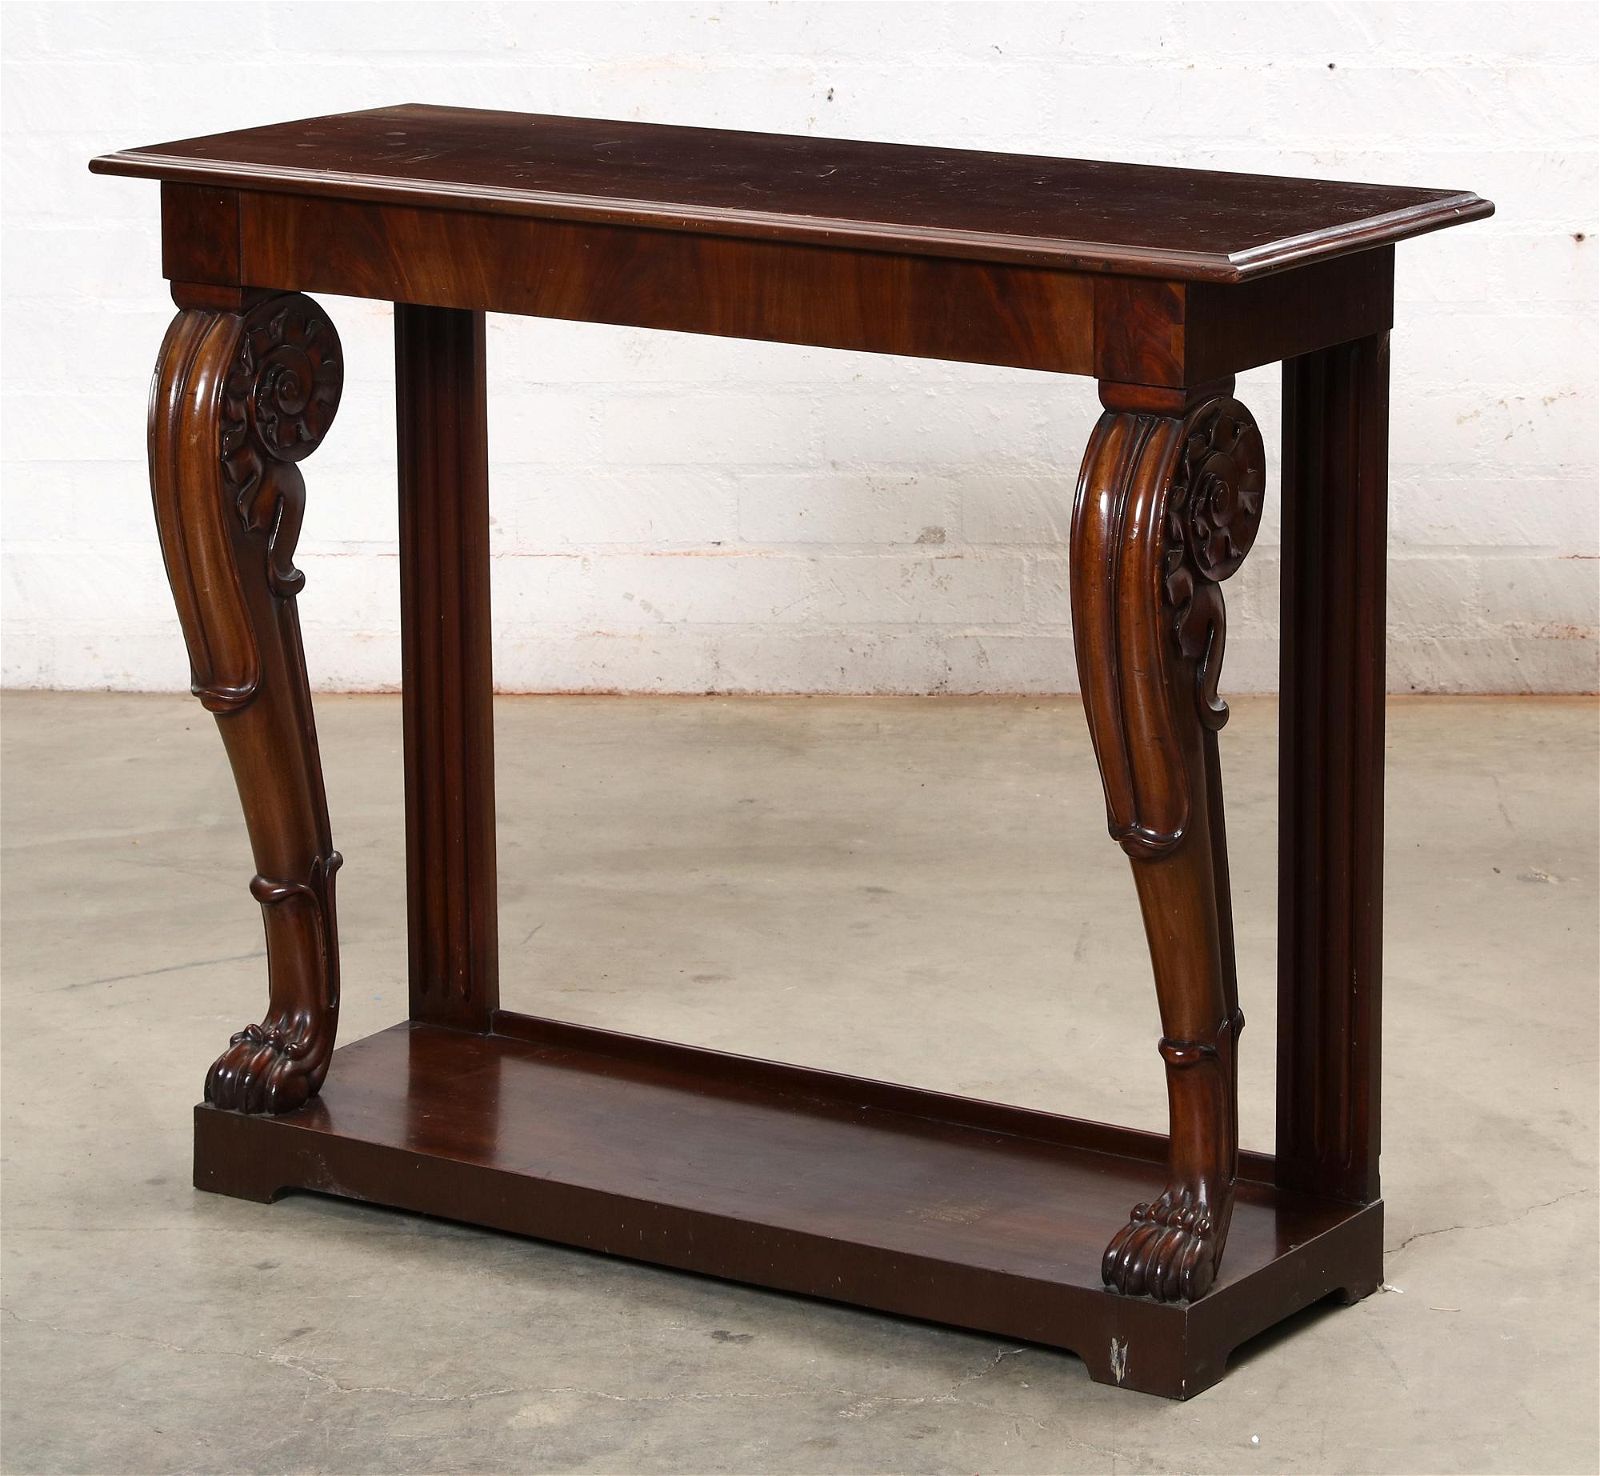 A NEOCLASSICAL STYLE MAHOGANY CONSOLE 2fb28b4